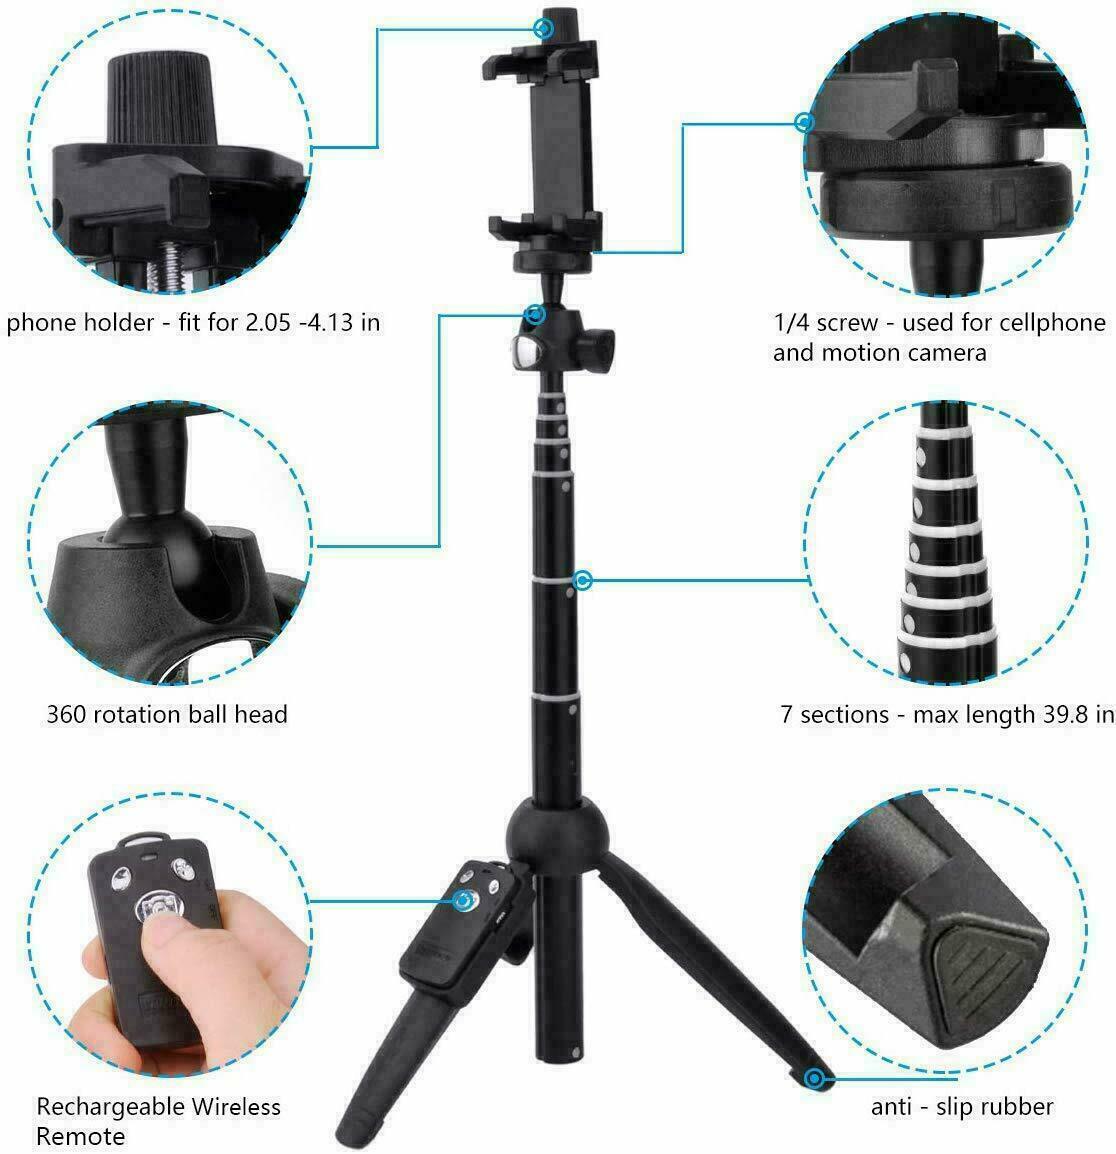 S 6 B, Microphone Stands, Stands & Tripods